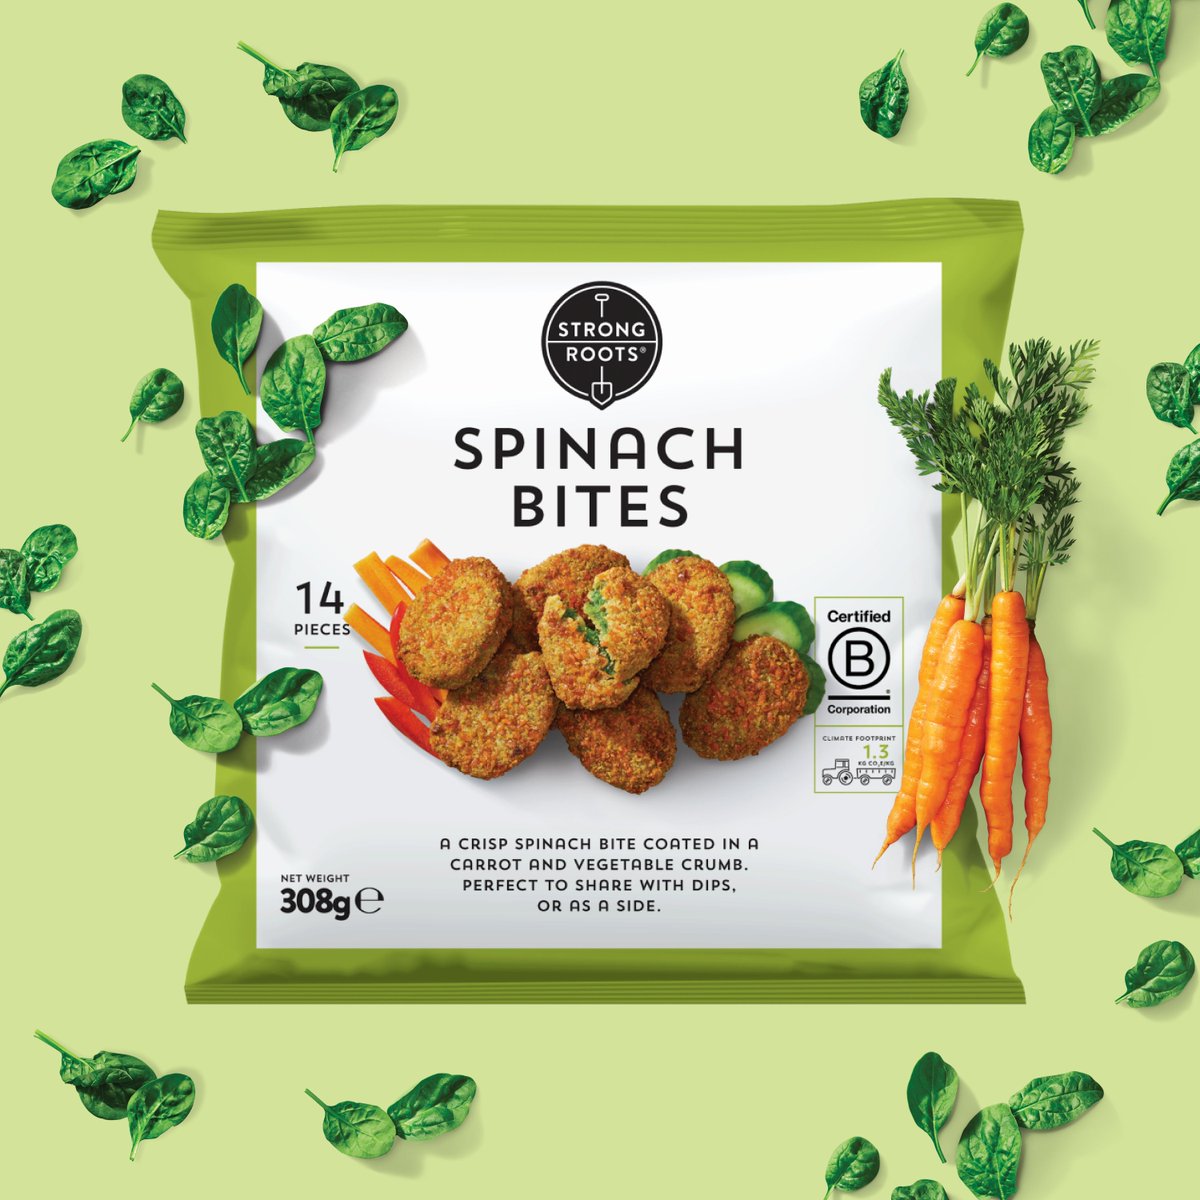 Small bites, big flavours! Crispy on the outside, tender on the inside—a bite-sized delight that packs a punch of flavour. Snack time just got a whole lot healthier and tastier! #SpinachBites #StrongRoots